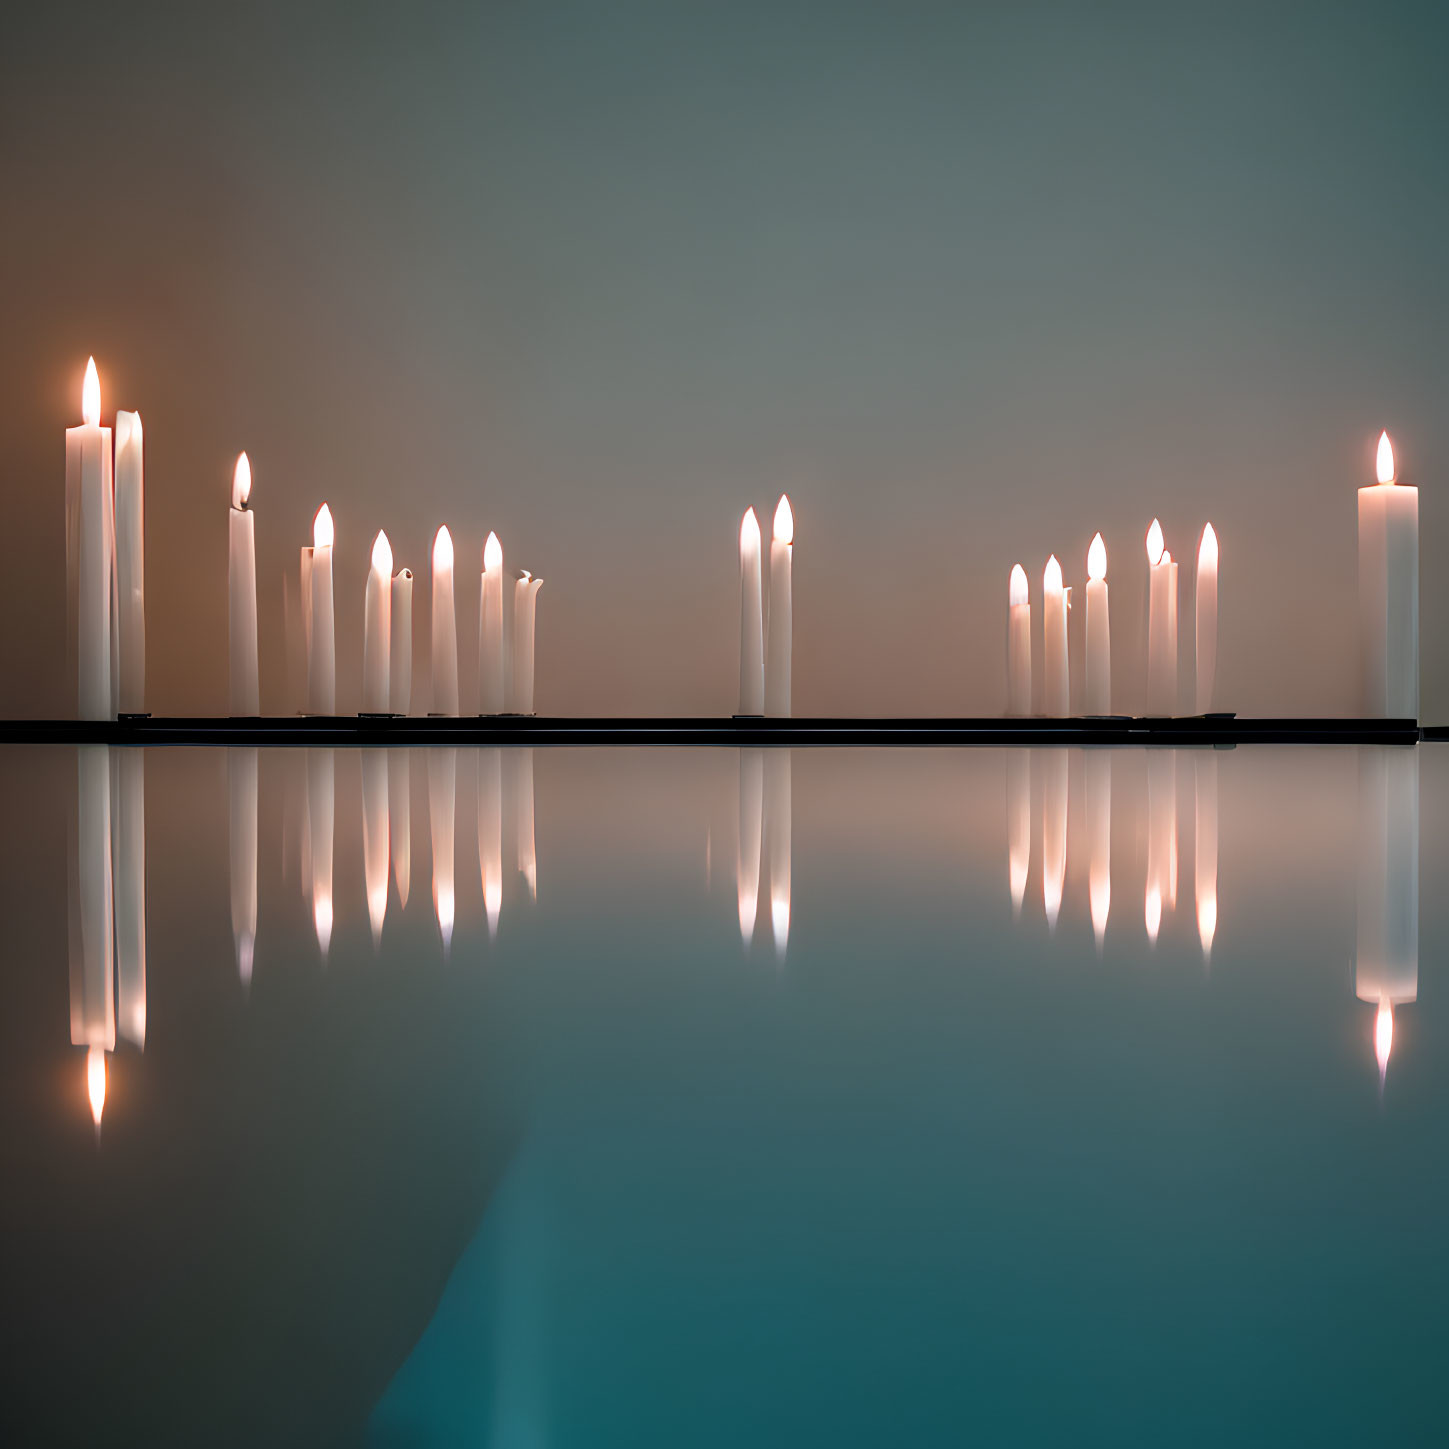 Row of Lit Candles Reflecting on Glossy Surface Against Blue Gradient Background